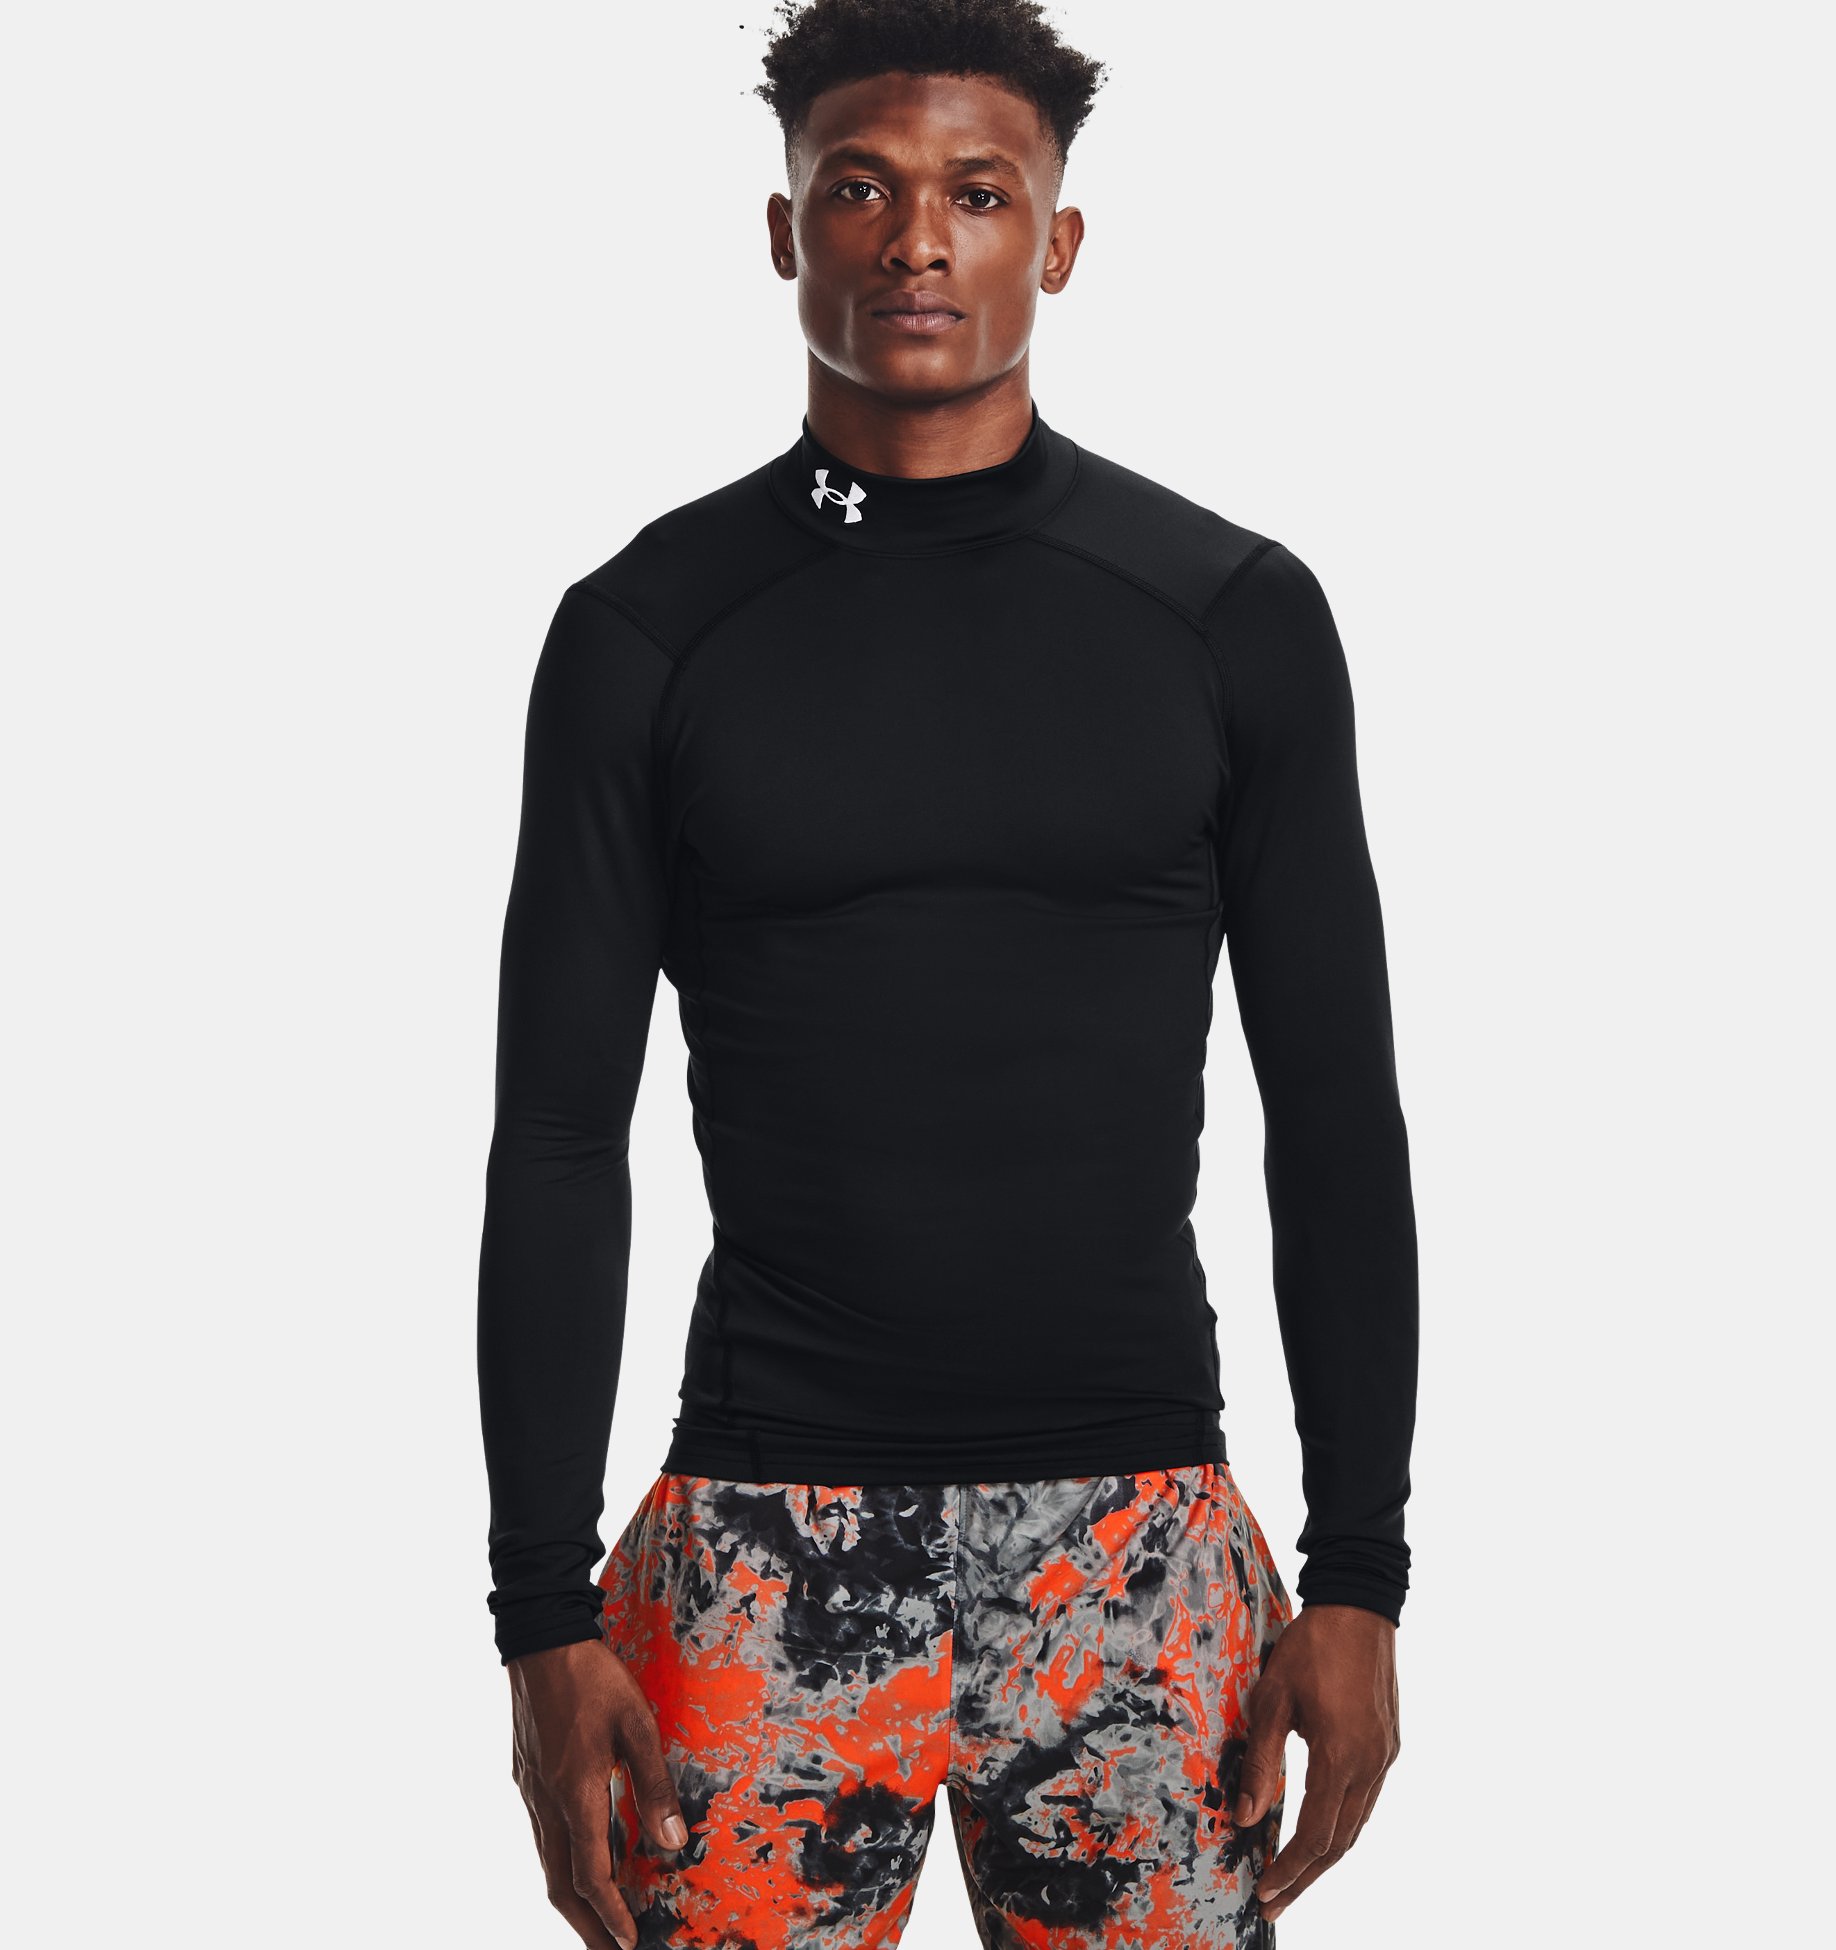 Preach Discard Playing chess Men's ColdGear® Compression Mock | Under Armour